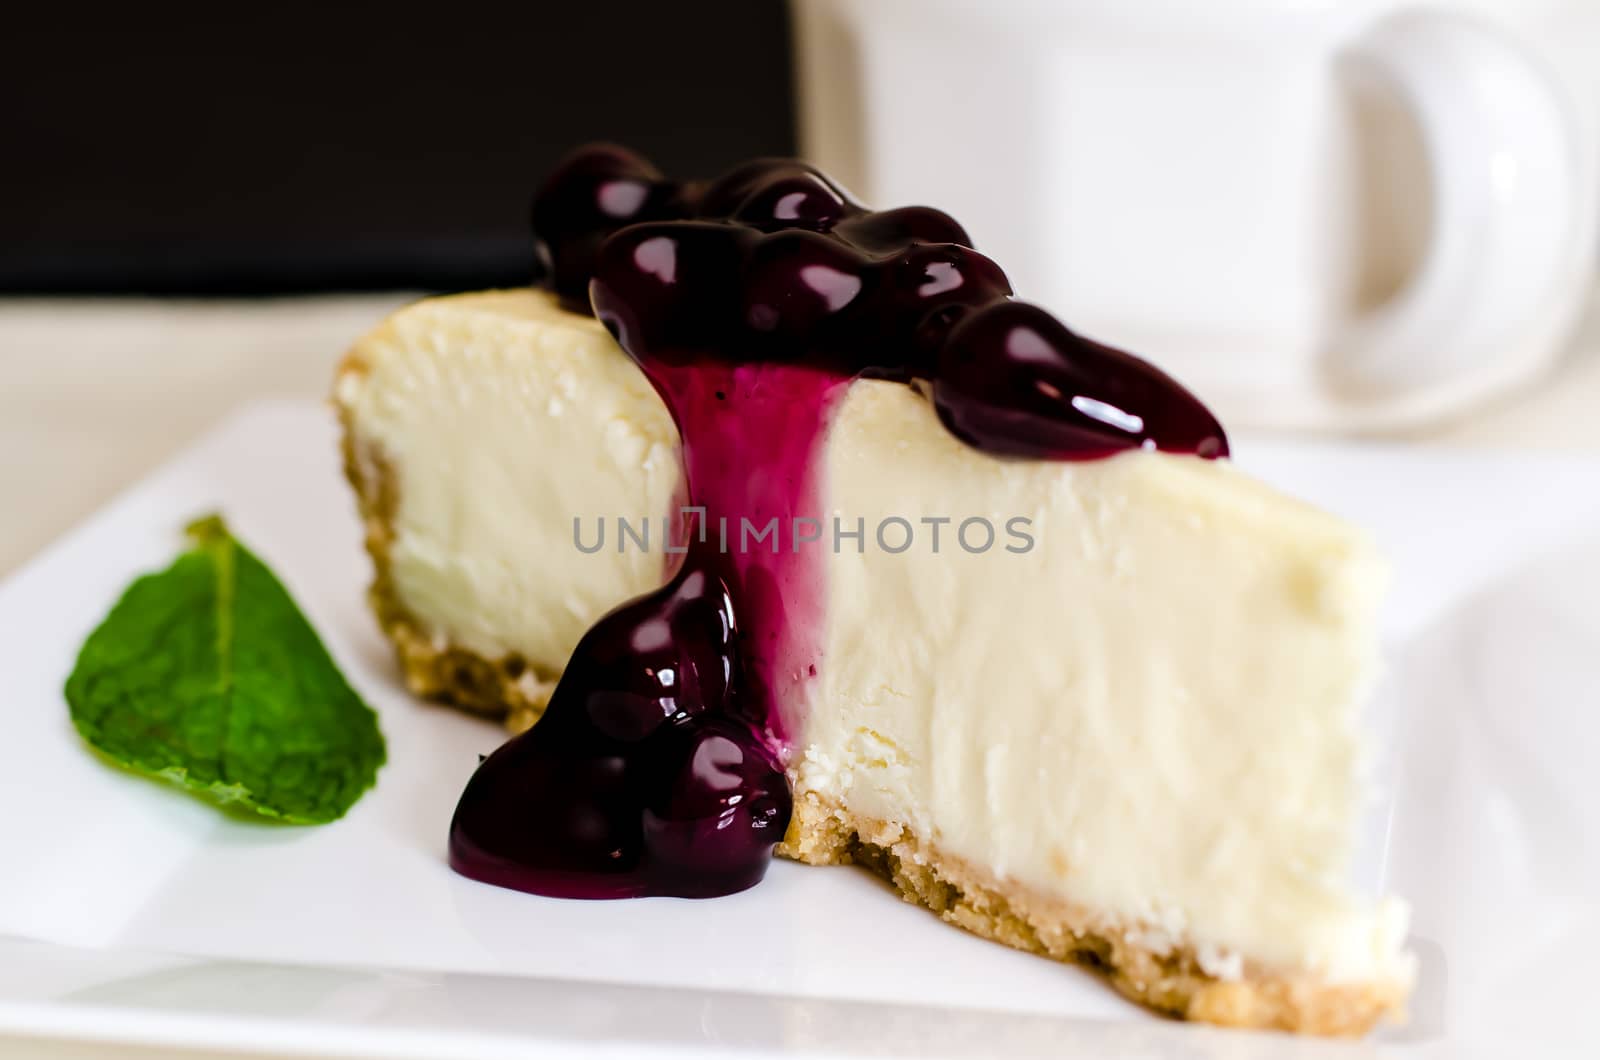 Slice of blueberry cheesecake and coffee with mint garnish.  Shallow depth of field.